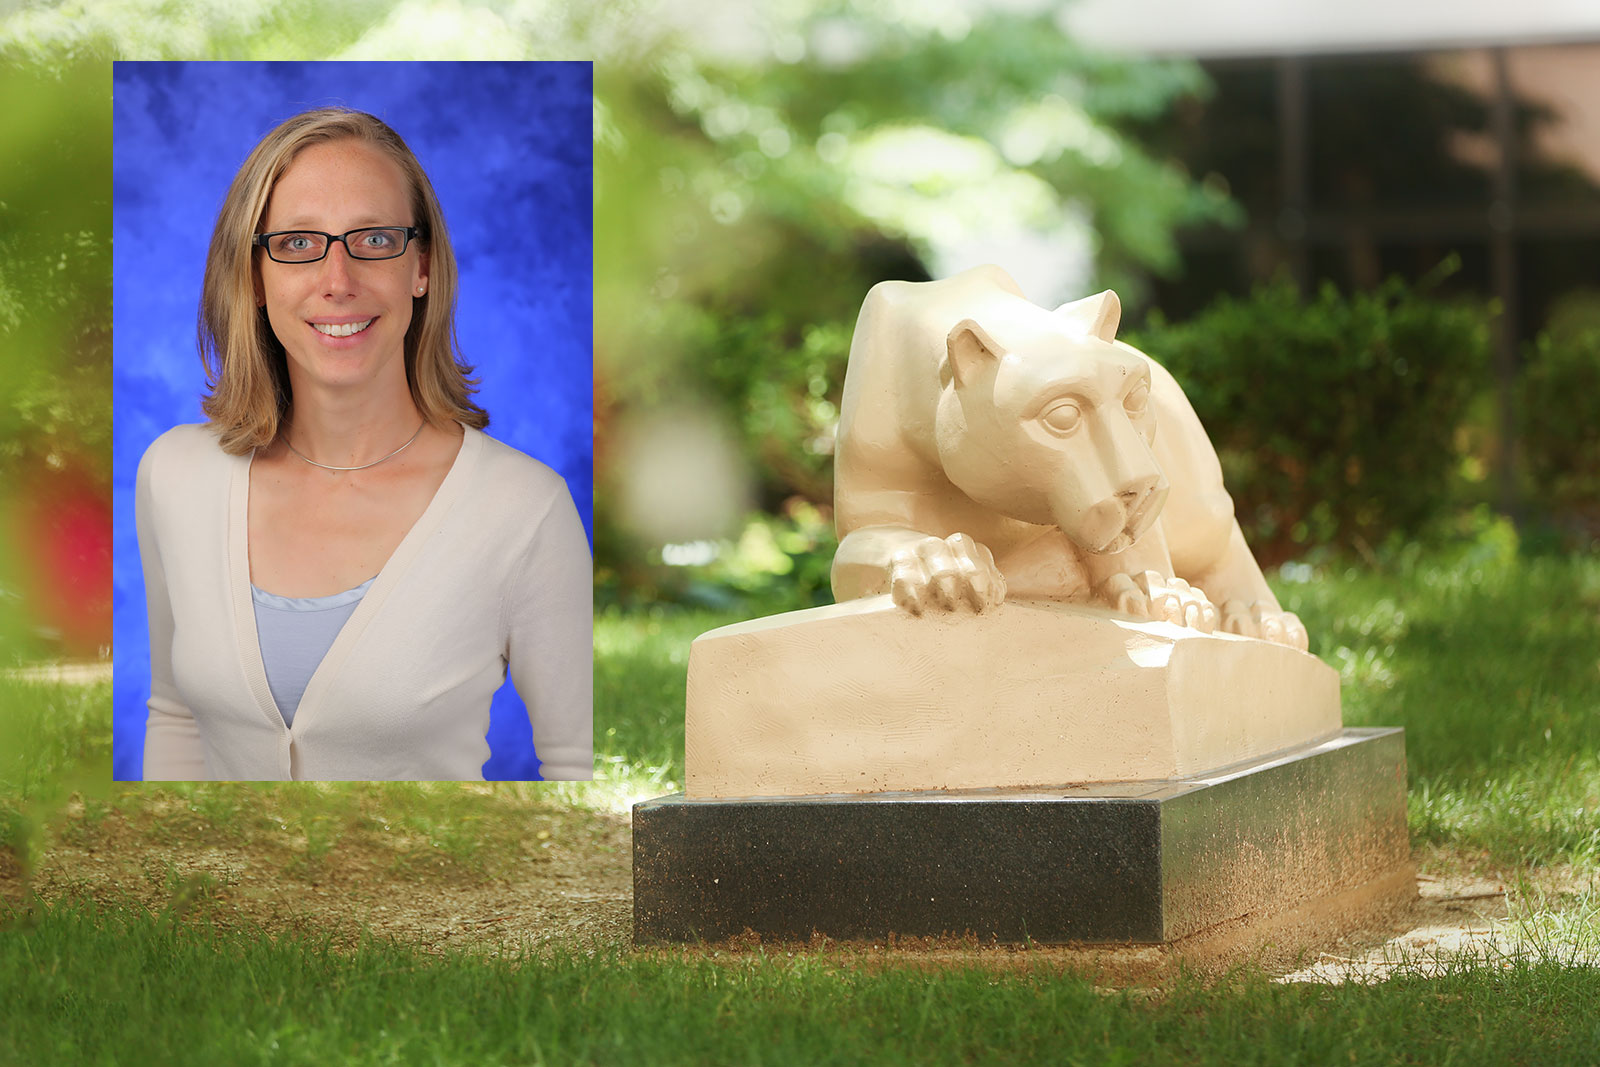 Nadine Hempel, PhD, Associate Professor of Pharmacology at Penn State College of Medicine and Penn State Cancer Institute member, recently received an equipment award from Agilent Technologies. A photo of Hempel, wearing a white blouse and glasses and standing in front of a blue photo background, is superimposed on an image of the College's Nittany Lion mascot statue outdoors, with trees and flowers visible in the background.